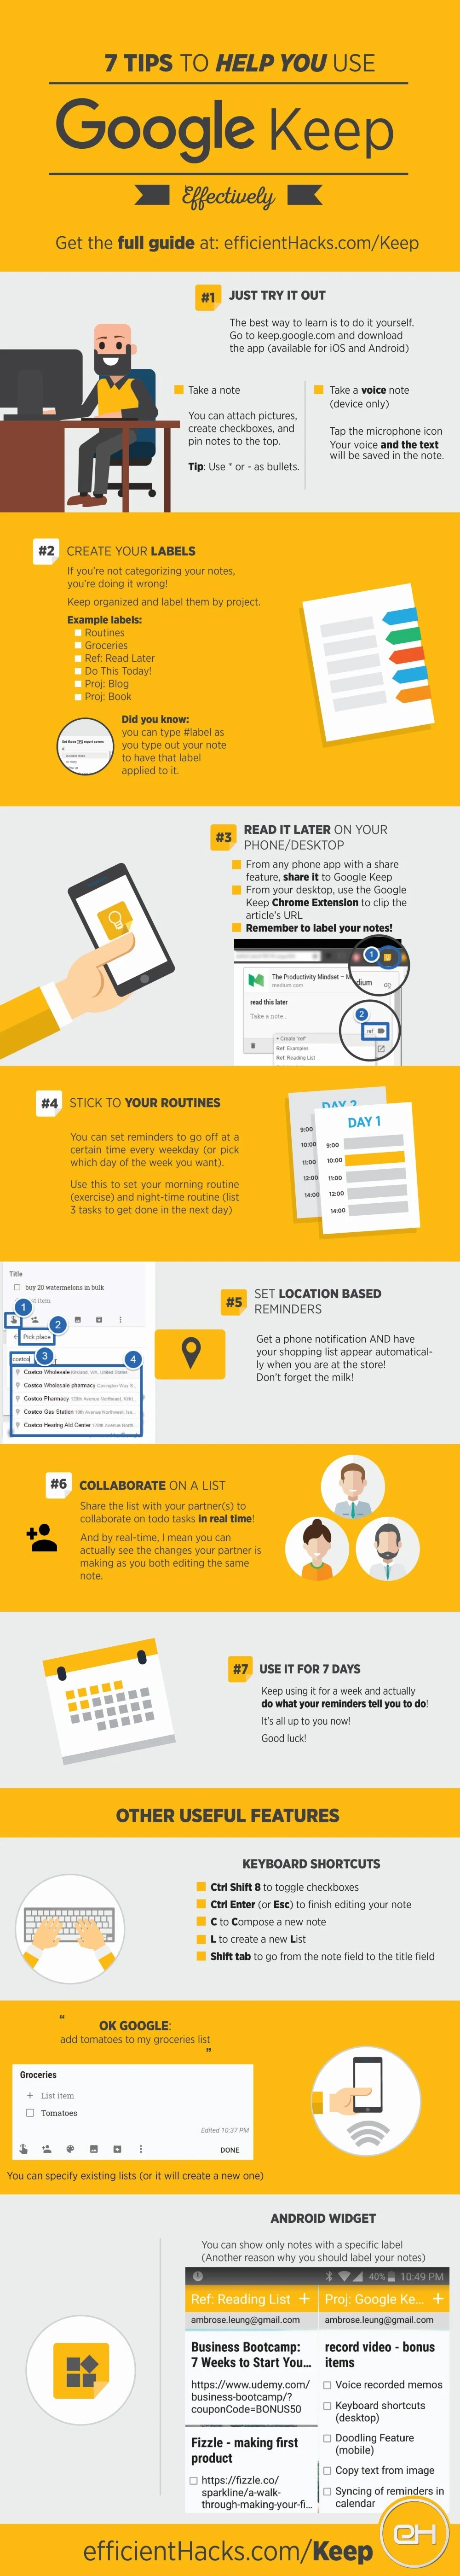 7 Tips To Help You Use Google Keep Effectively - #infographic